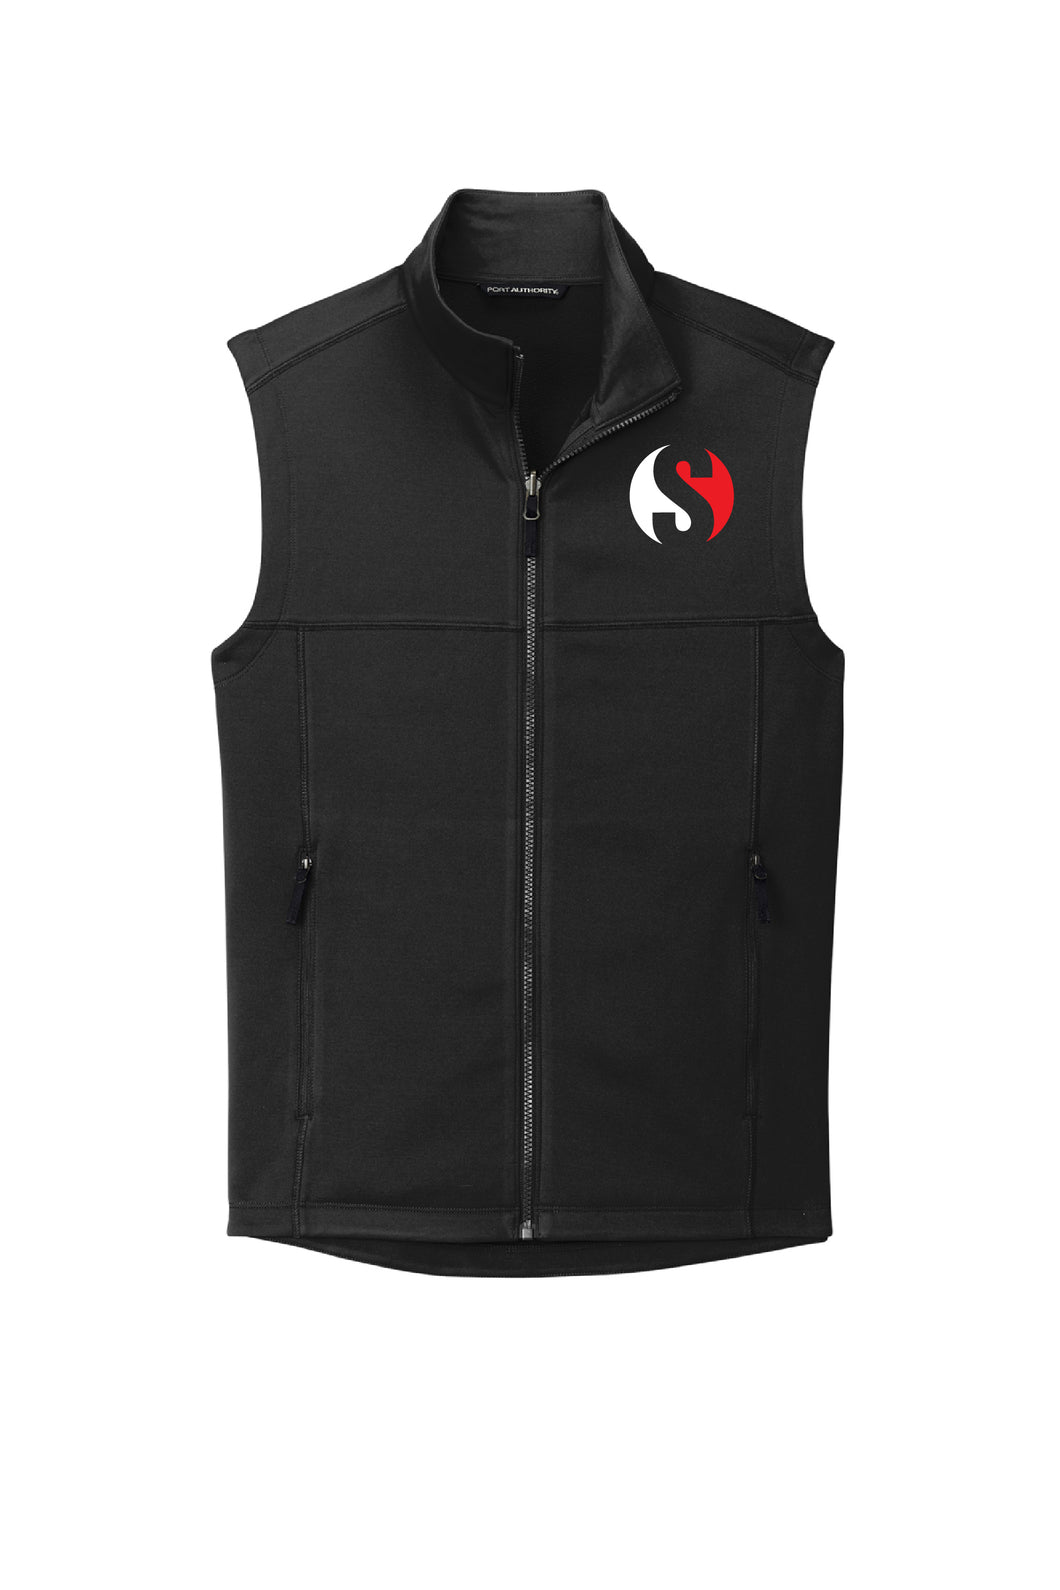 Classic Monogrammed Fleece Vest - Sunny and Southern